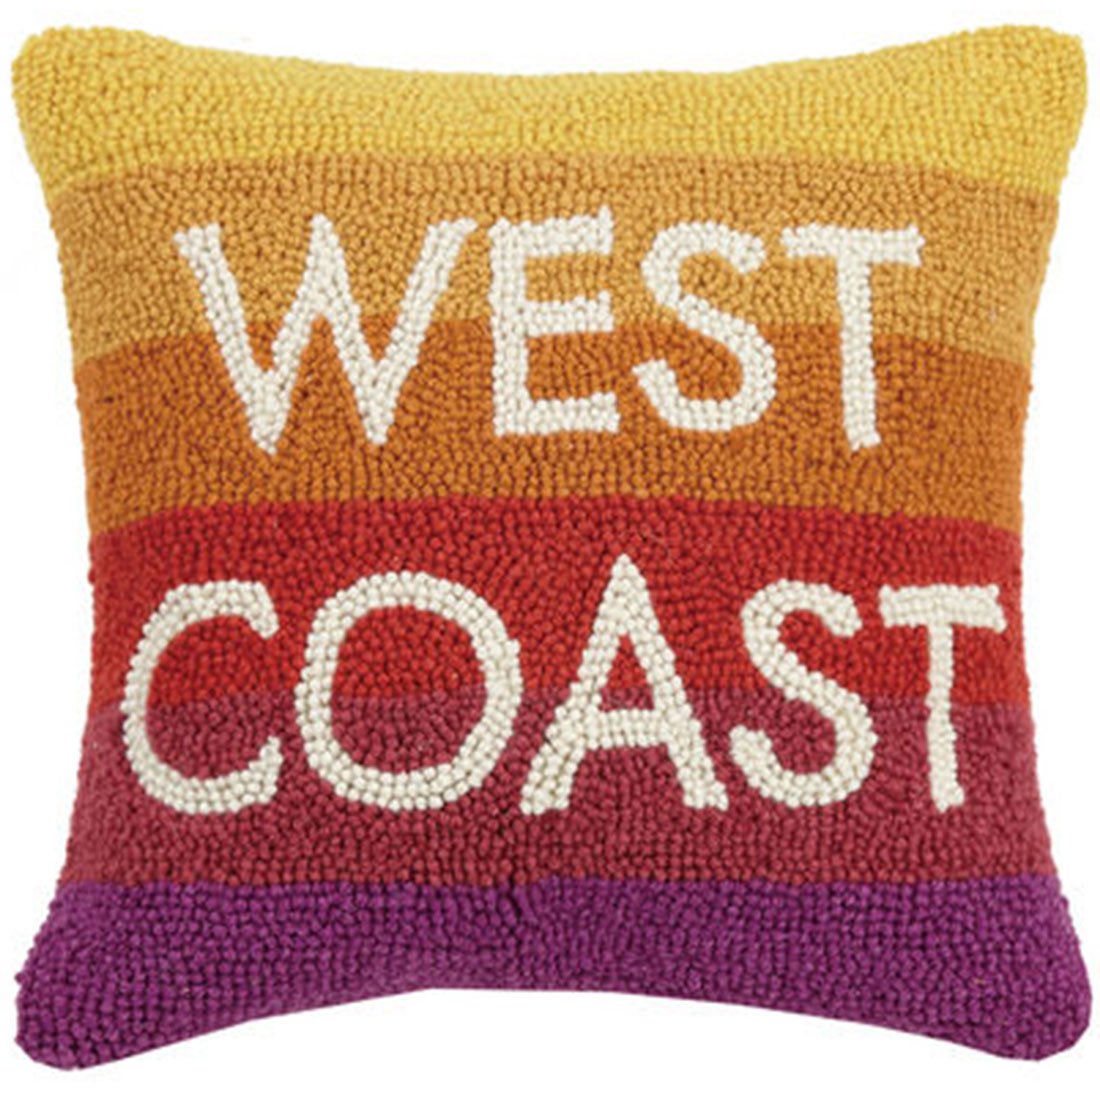 an embroidered pillow that says West Coast